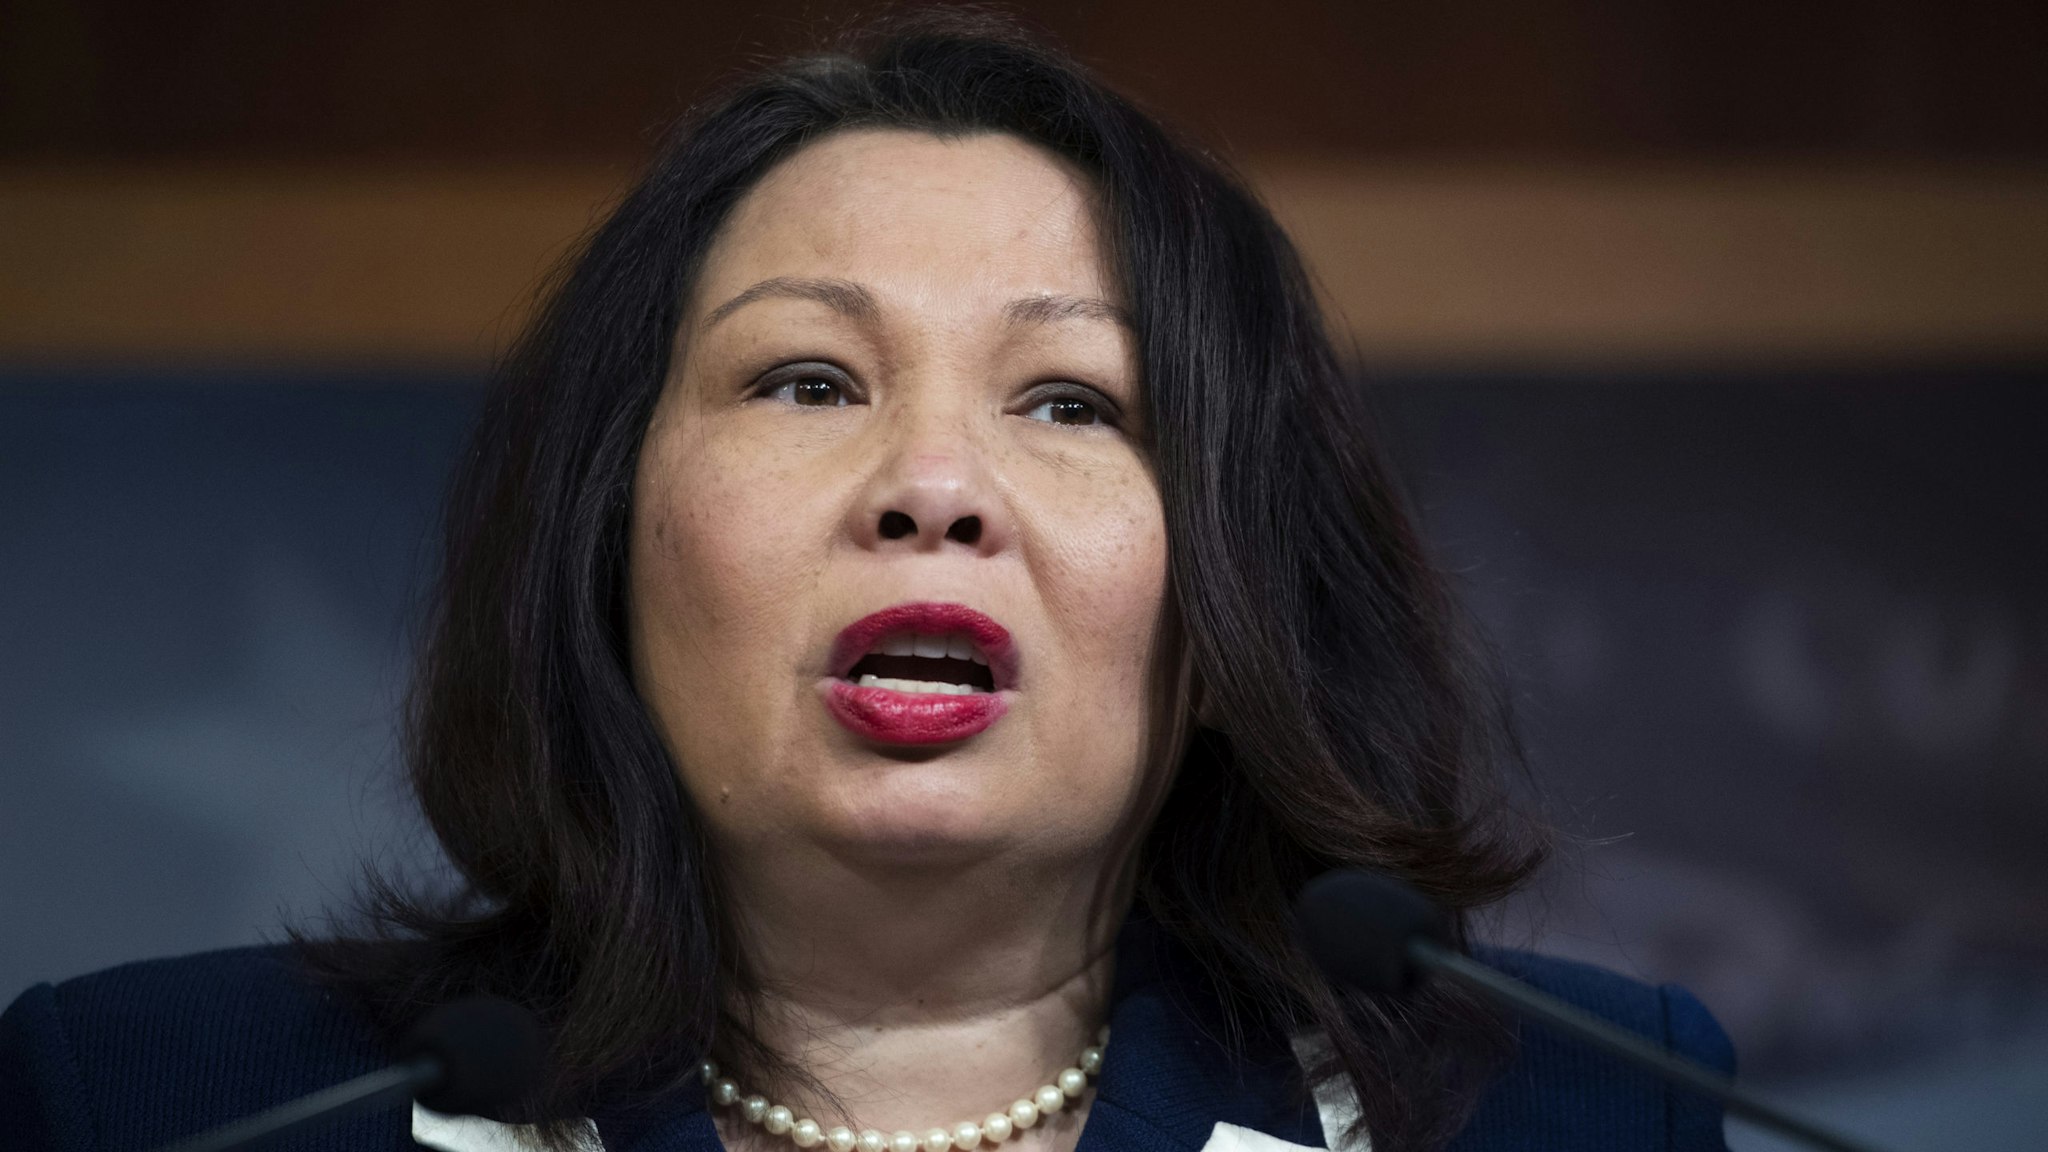 UNITED STATES - JANUARY 25: Sen. Tammy Duckworth, D-Ill., conducts a news conference in the Capitol after the Senate adjourned for the day the impeachment trial of President Donald Trump on Saturday, January 25, 2020.